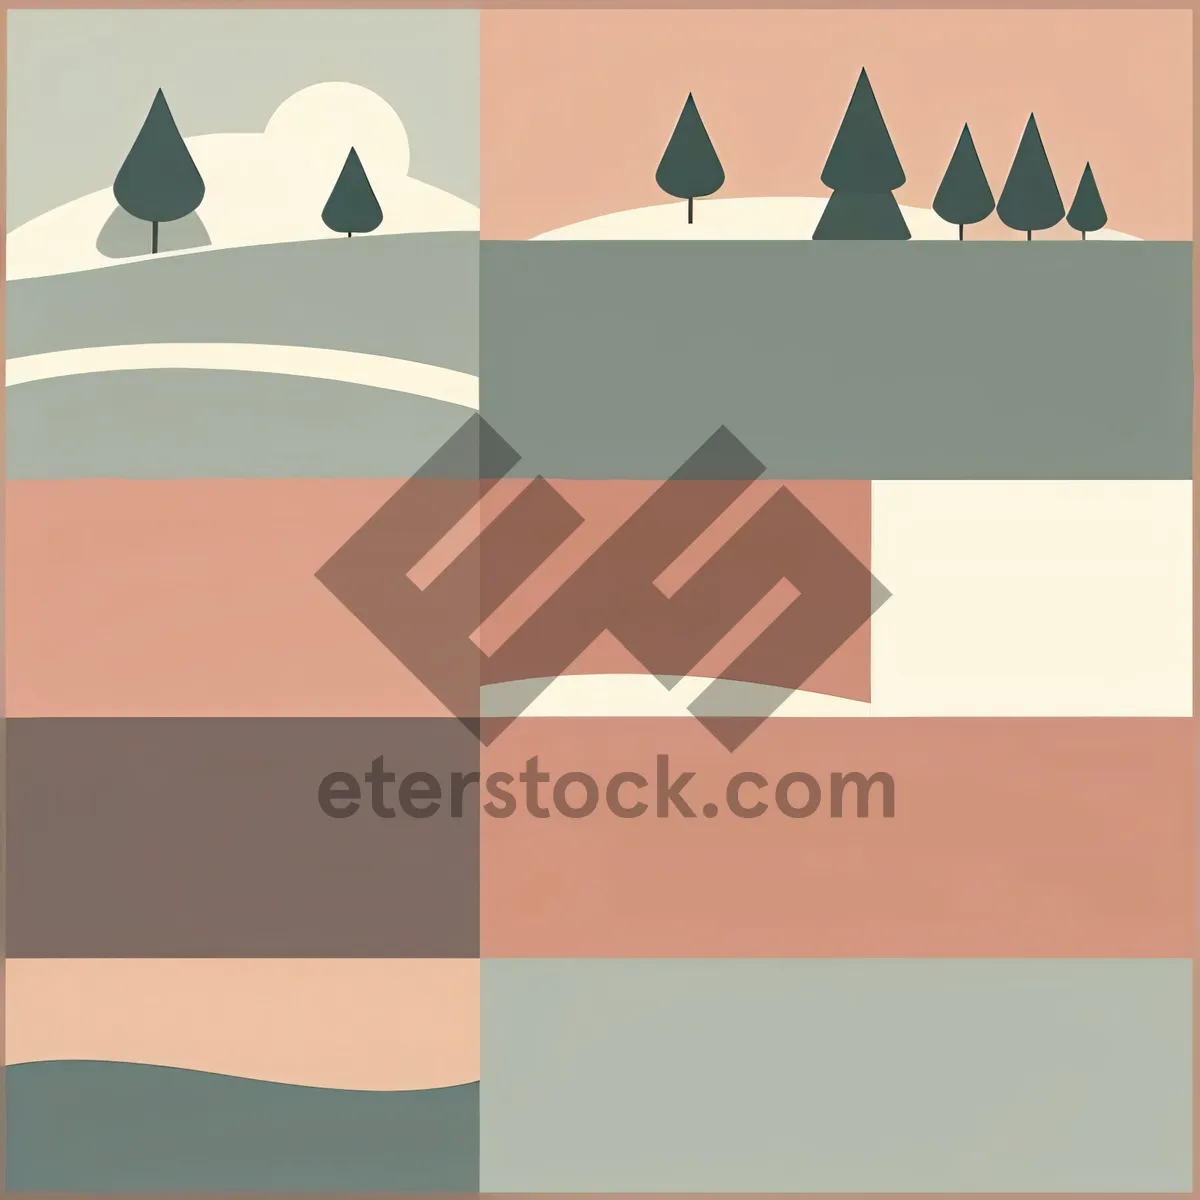 Picture of Symbolic Flag Design: Country Pyramid Icon